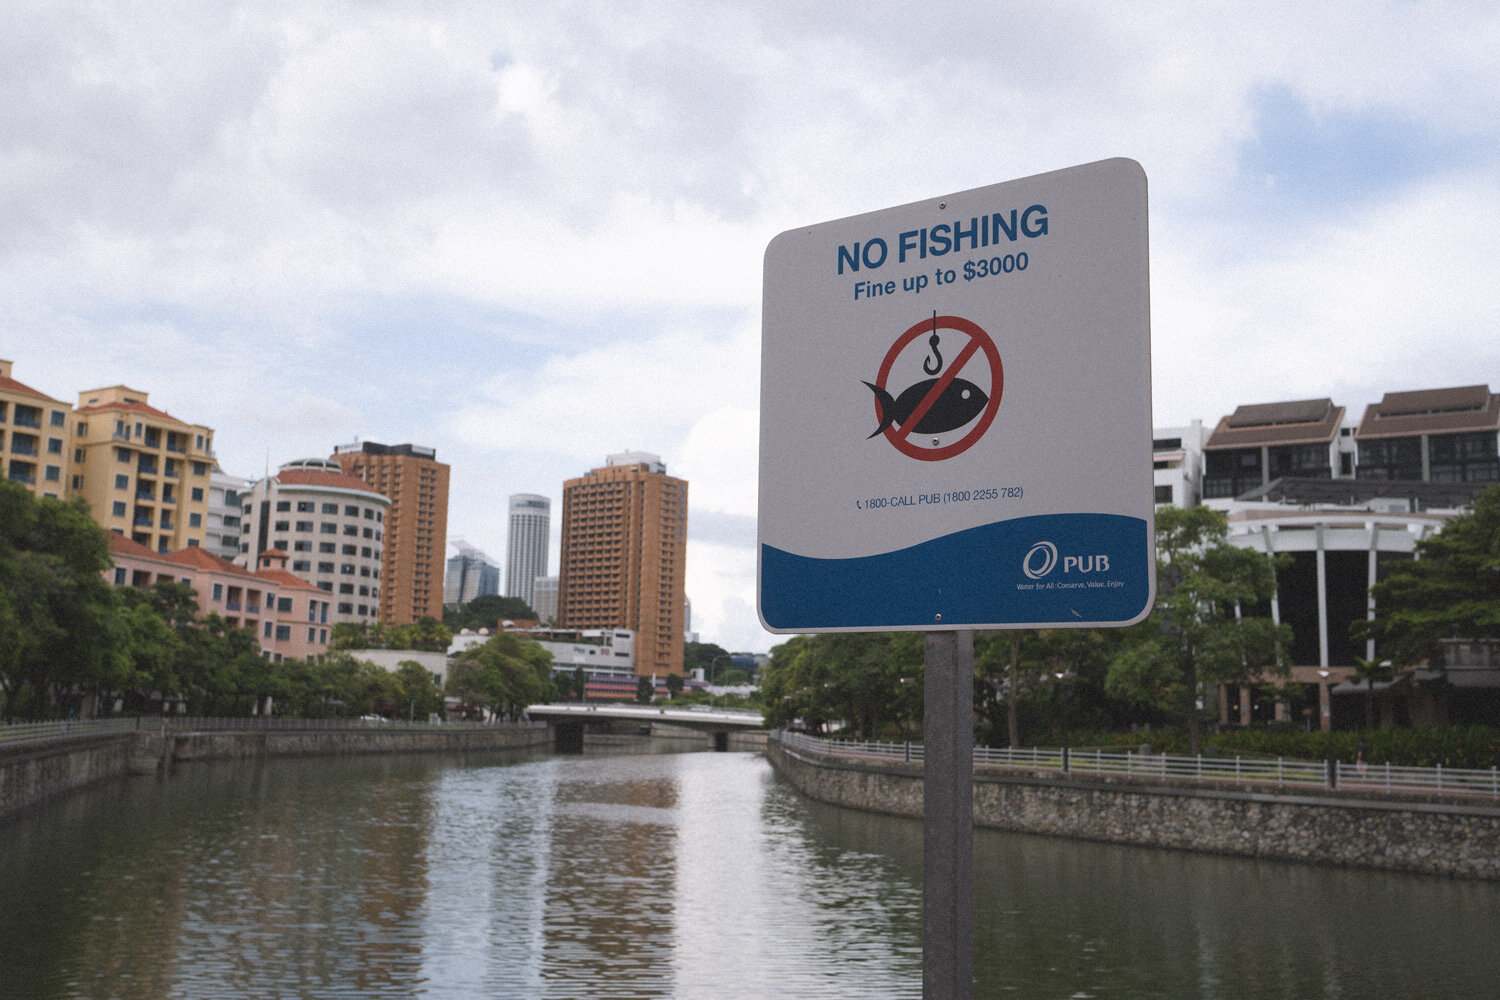 Fishing in Singapore River can cost up to 3000 SGD penalty ;-)